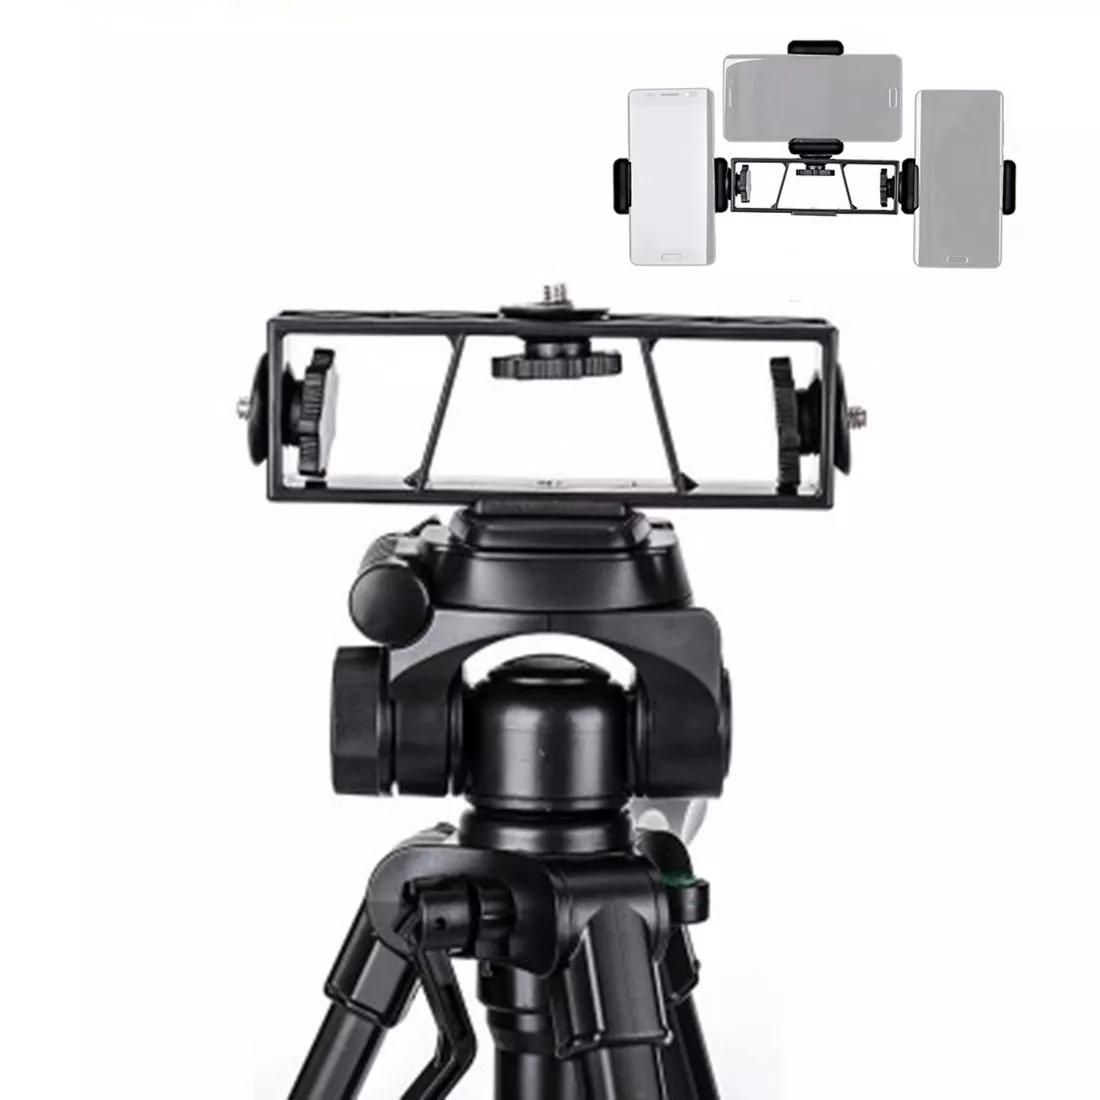 Three-position-Live-Broadcast-Mobile-Phone-Holder-Photography-Tripod-Accessory-Support-Mounting-3-Pc-1673457